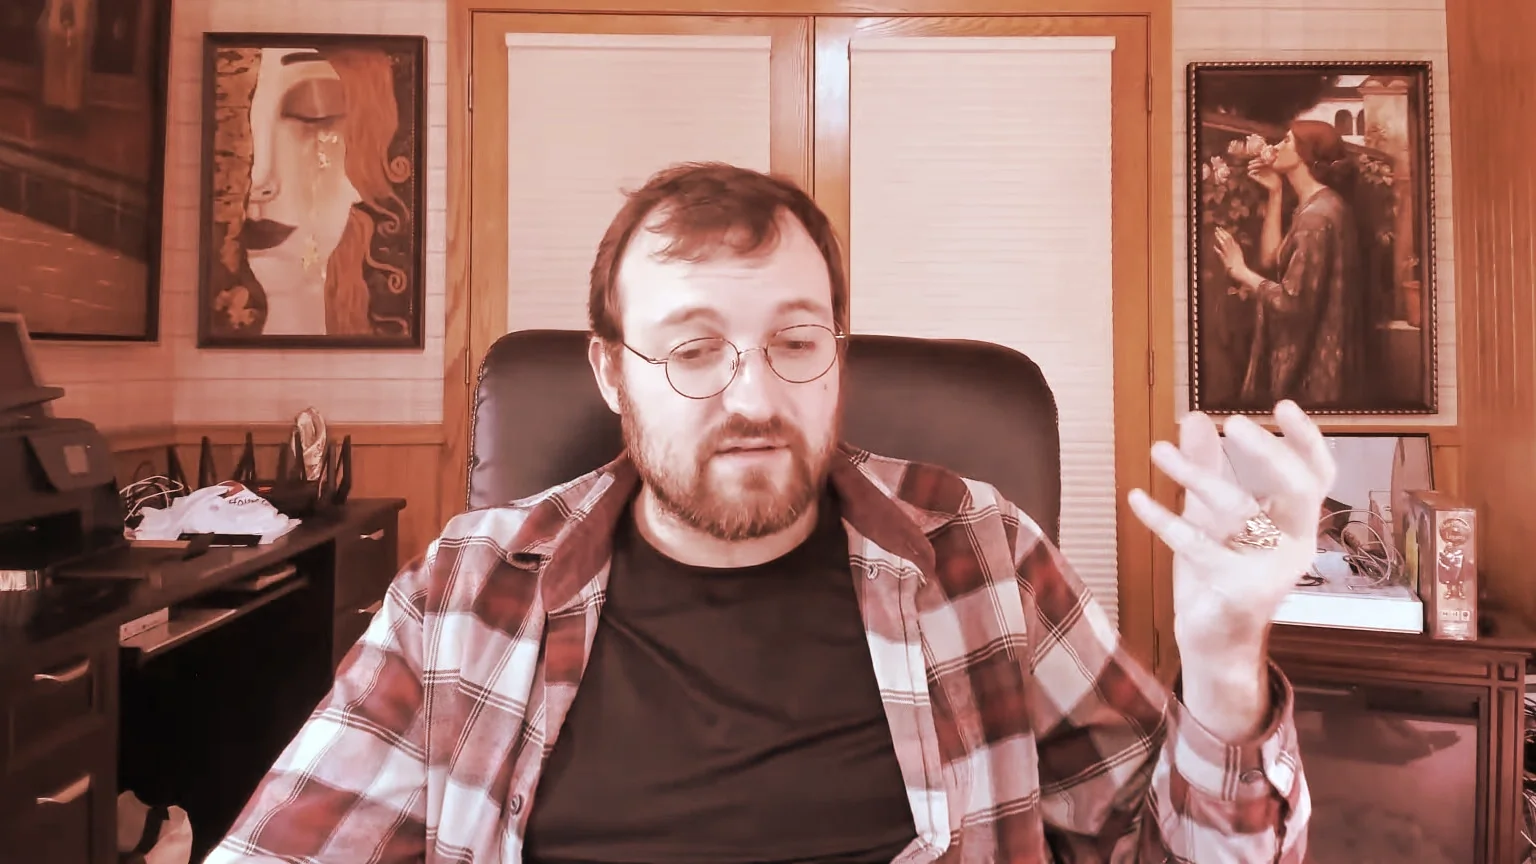 "Many DeFi things are going on right now" at Cardano, says its founder. Image: YouTube